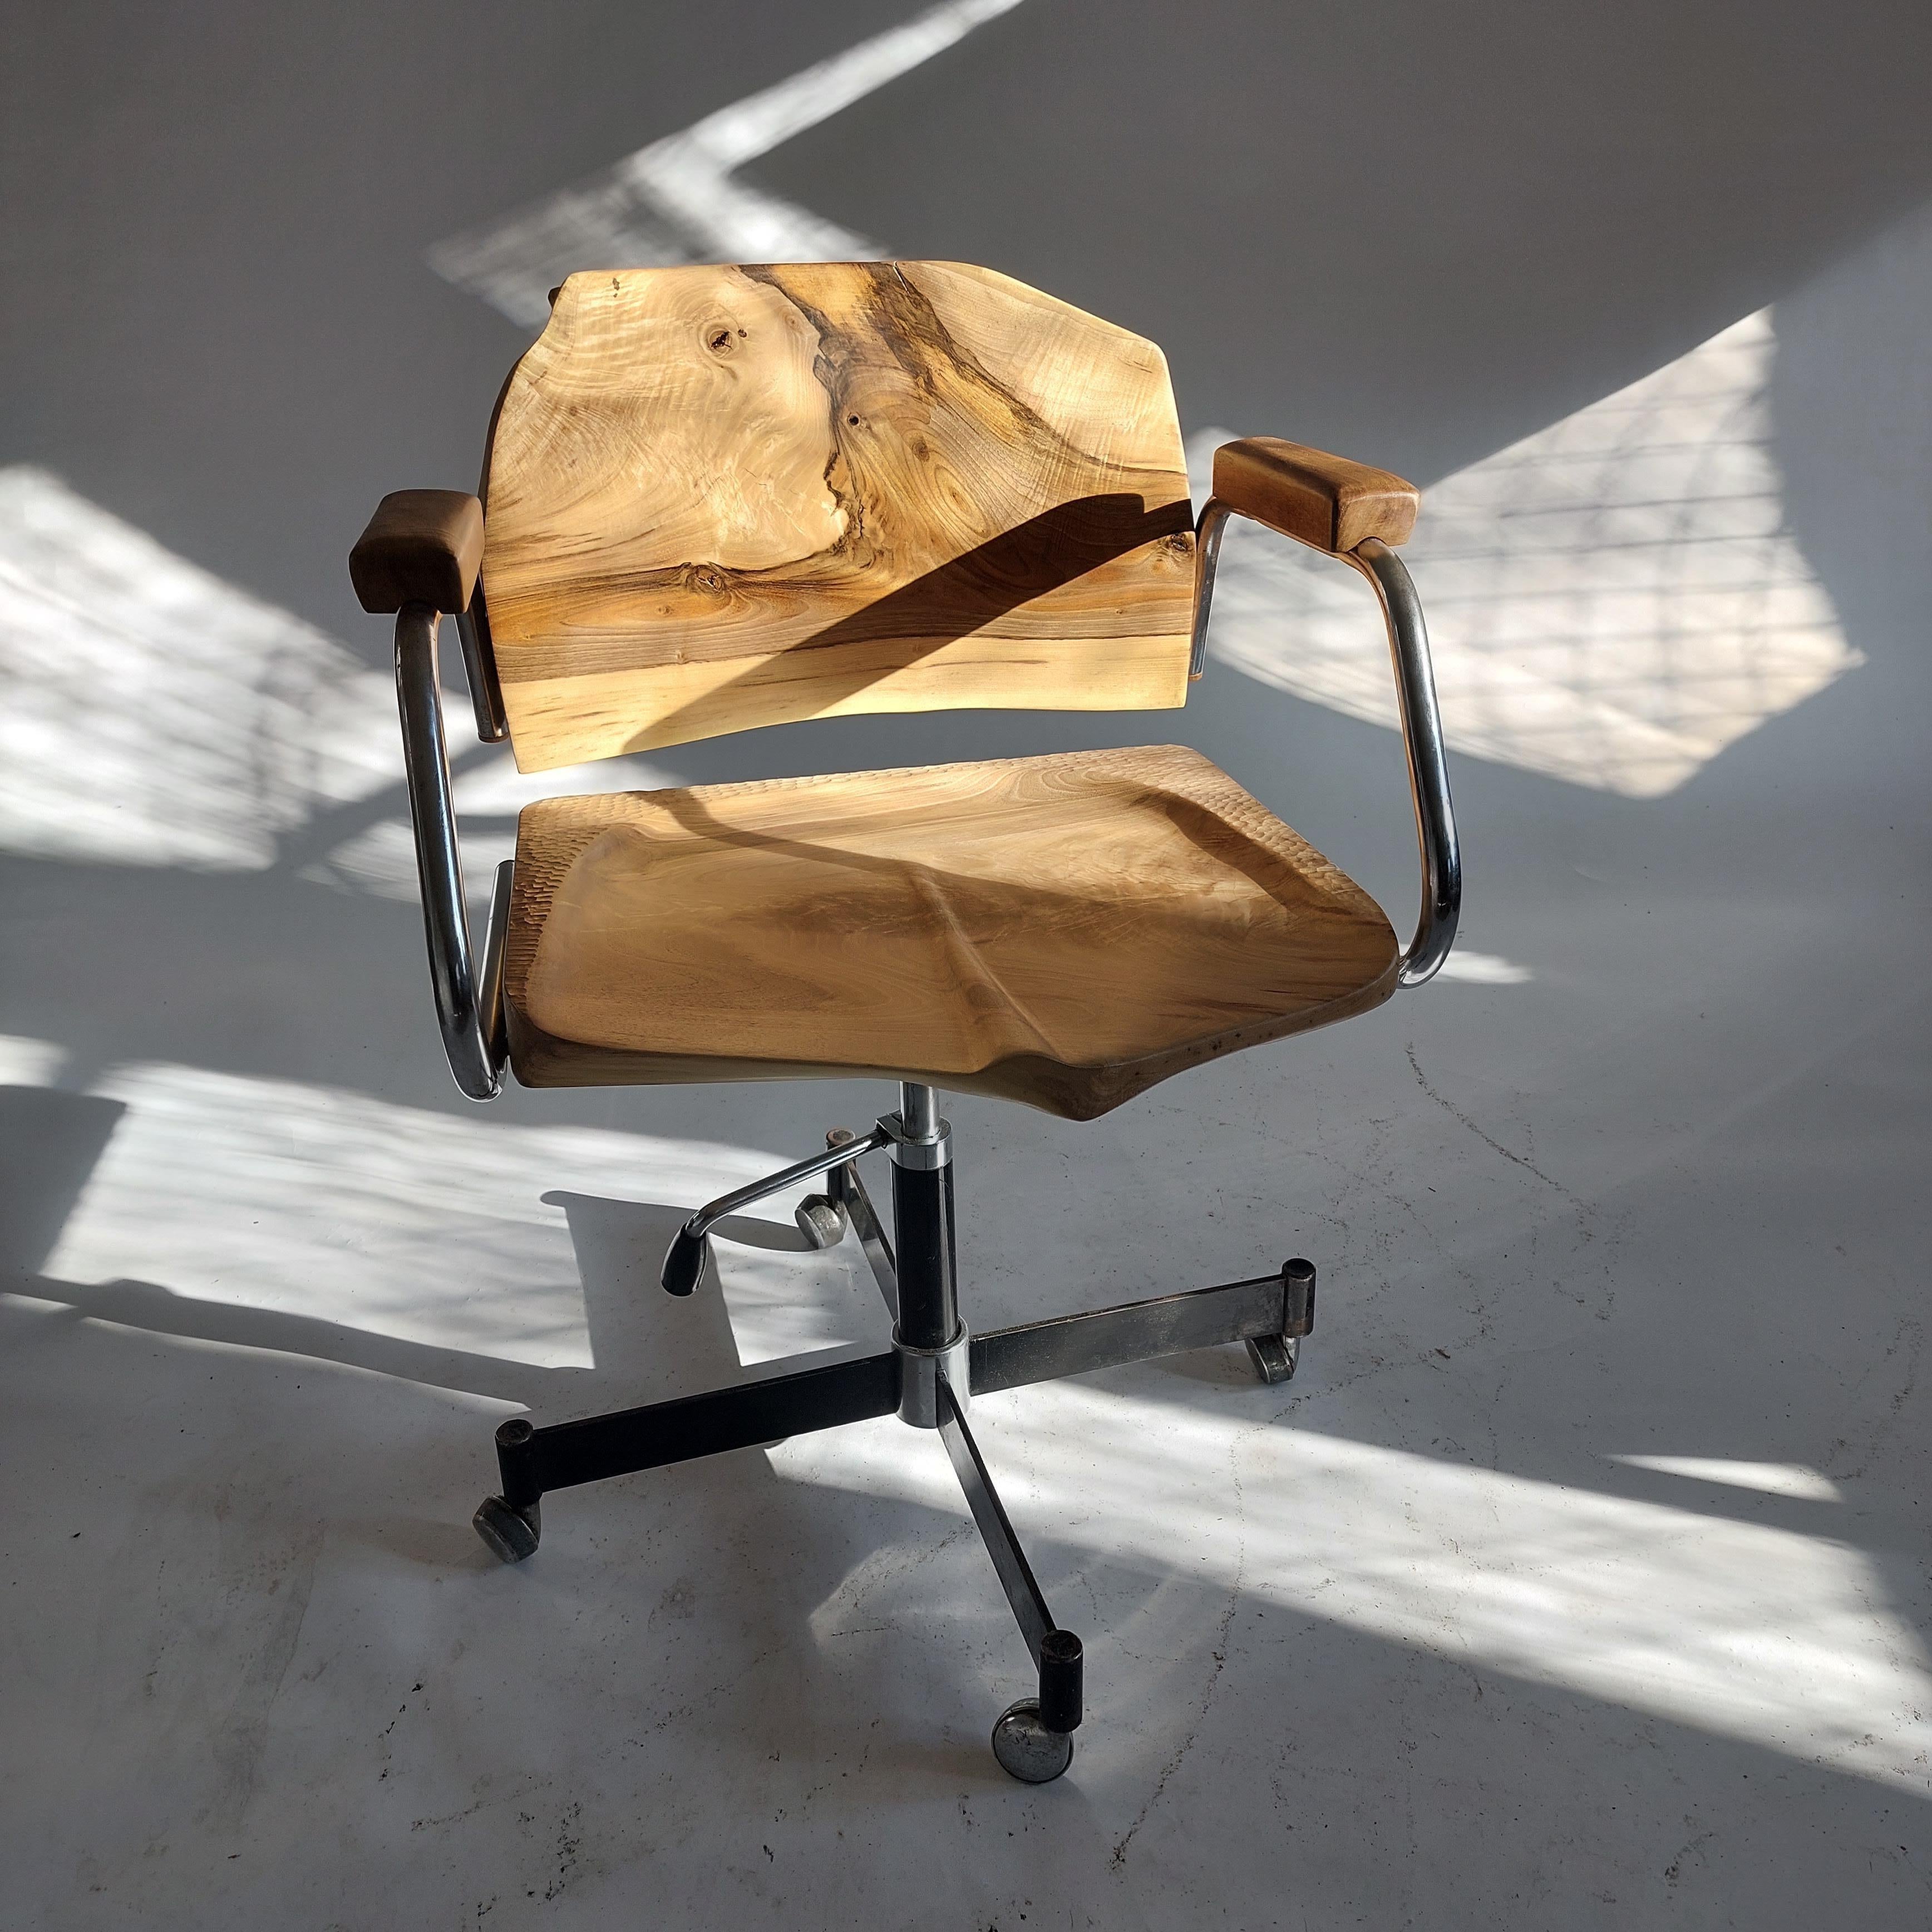 - Upcycled Swivel Chair
- Hand Carved Wood
- Nordic Furnishing
- Dates back to circa the 70s

Give your home a Nordic touch with this upcycled swivel chair. This one is a solid vintage player. Respect.
Reclaimed furnishing from an original ’70s